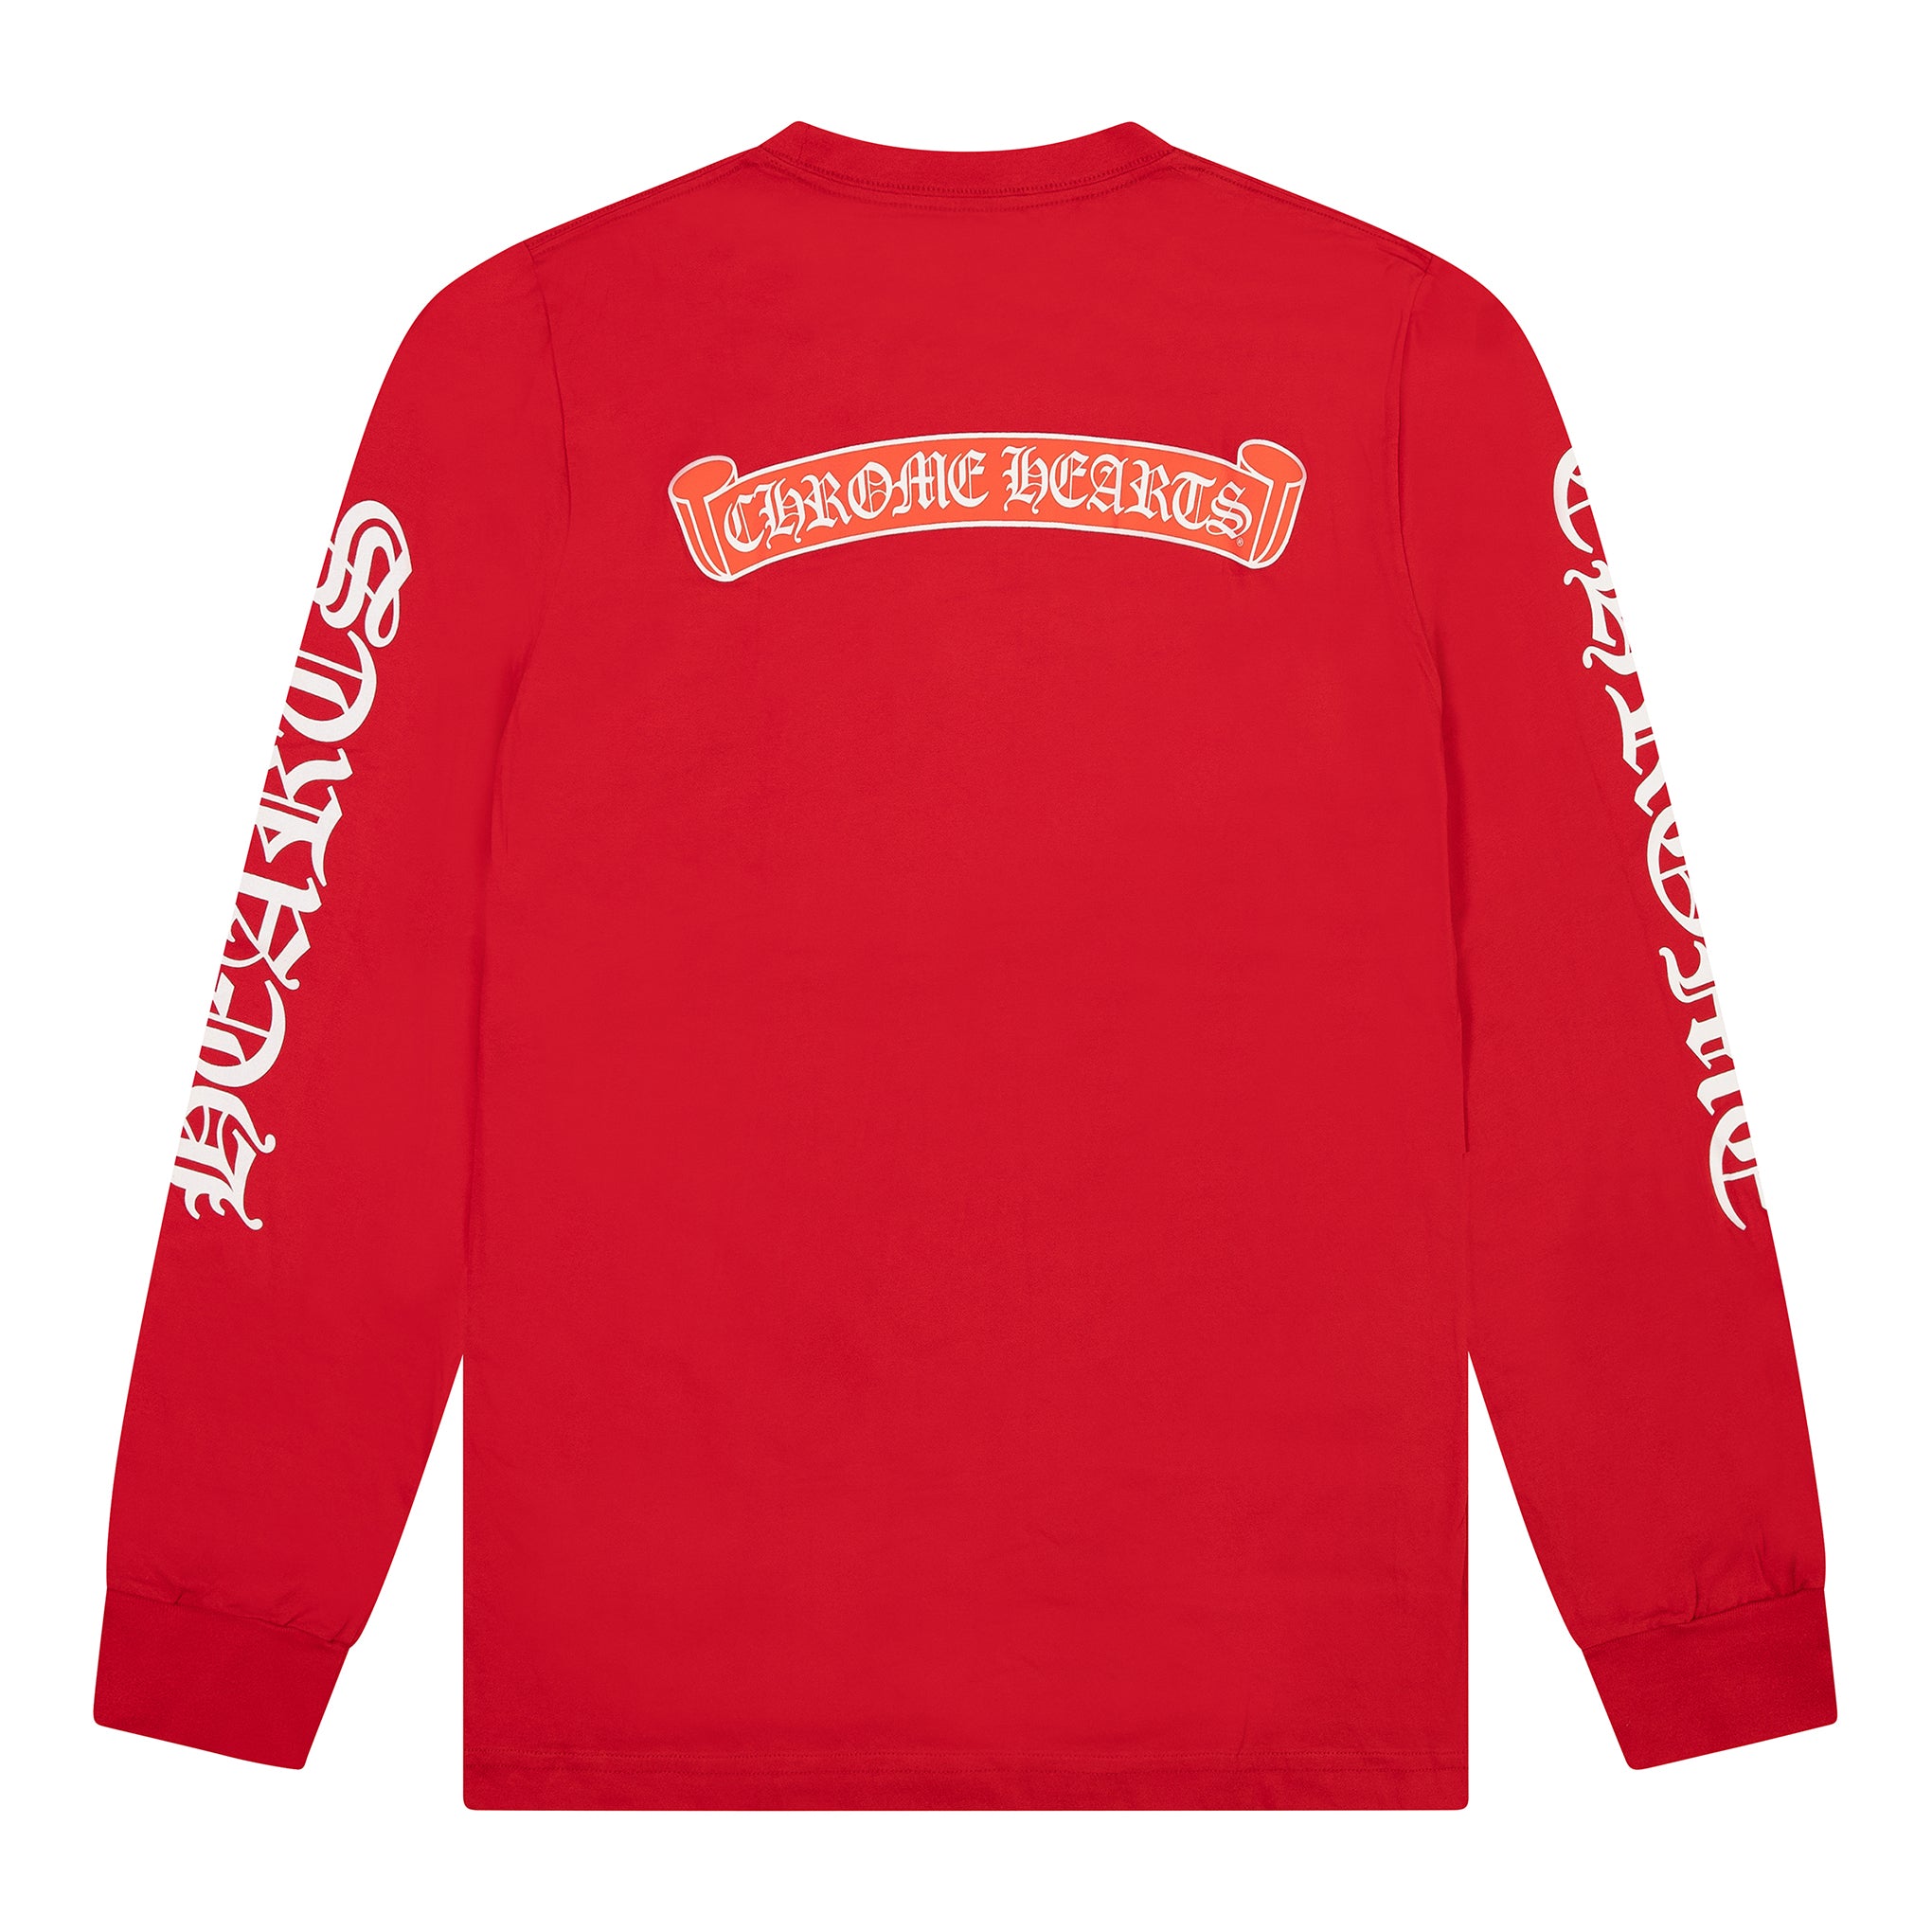 CHROME HEARTS SCROLL LOGO L/S TEE RED